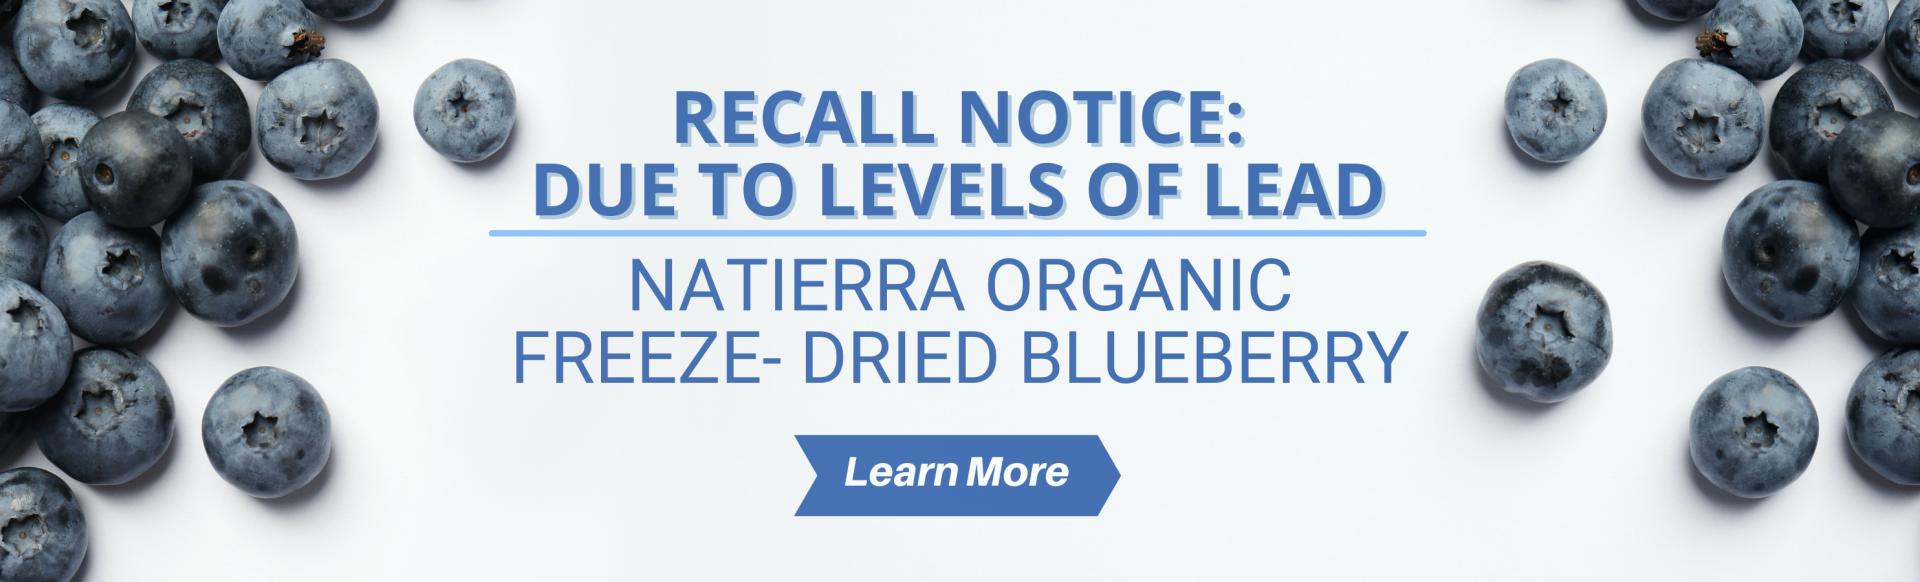 Recall Notice: Due to levels of lead, Natierra organic freeze-dried blueberry